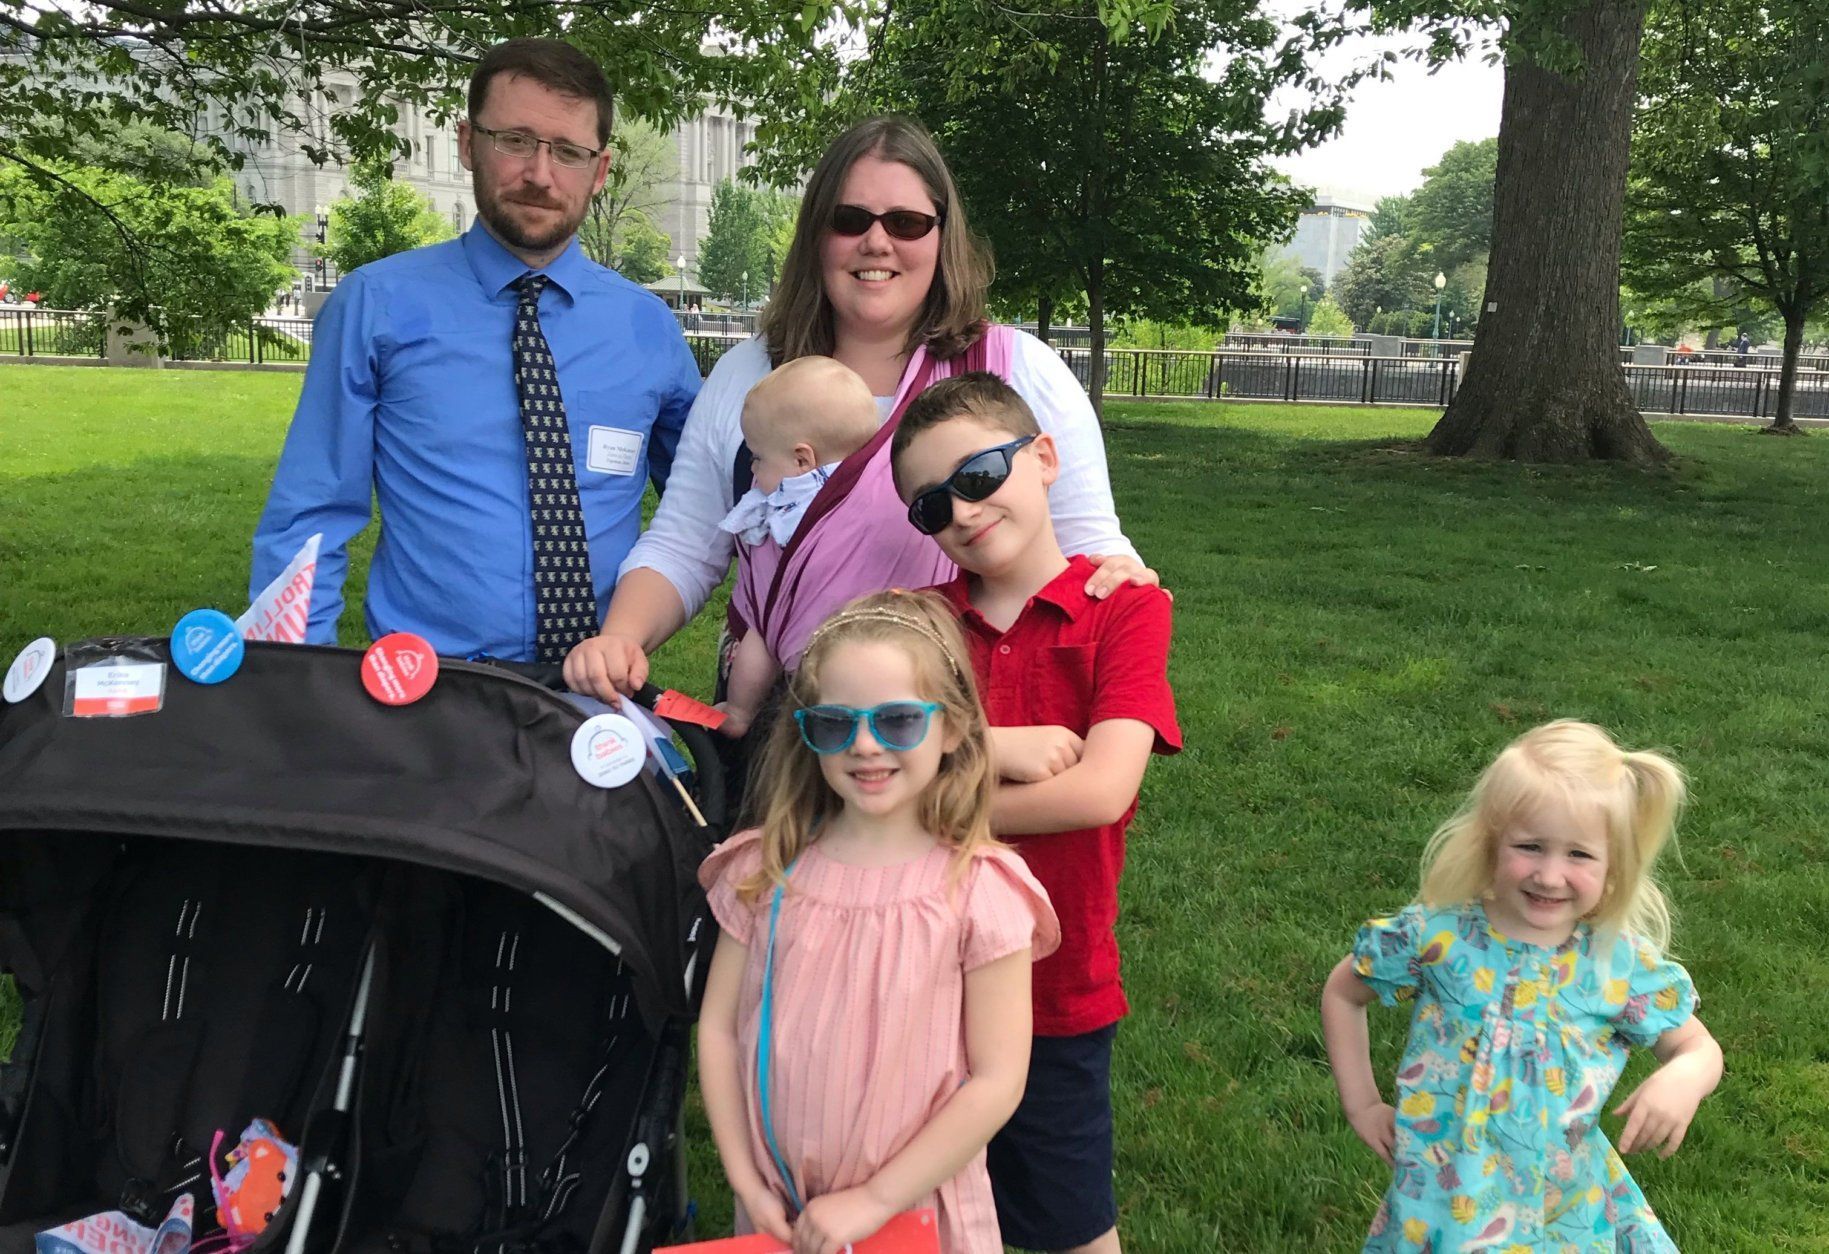 The McKenney family came all the way from Maine for the rally outside of the Capitol. Parents Ryan and Erika brought their four children. (WTOP/Mitchell Miller)